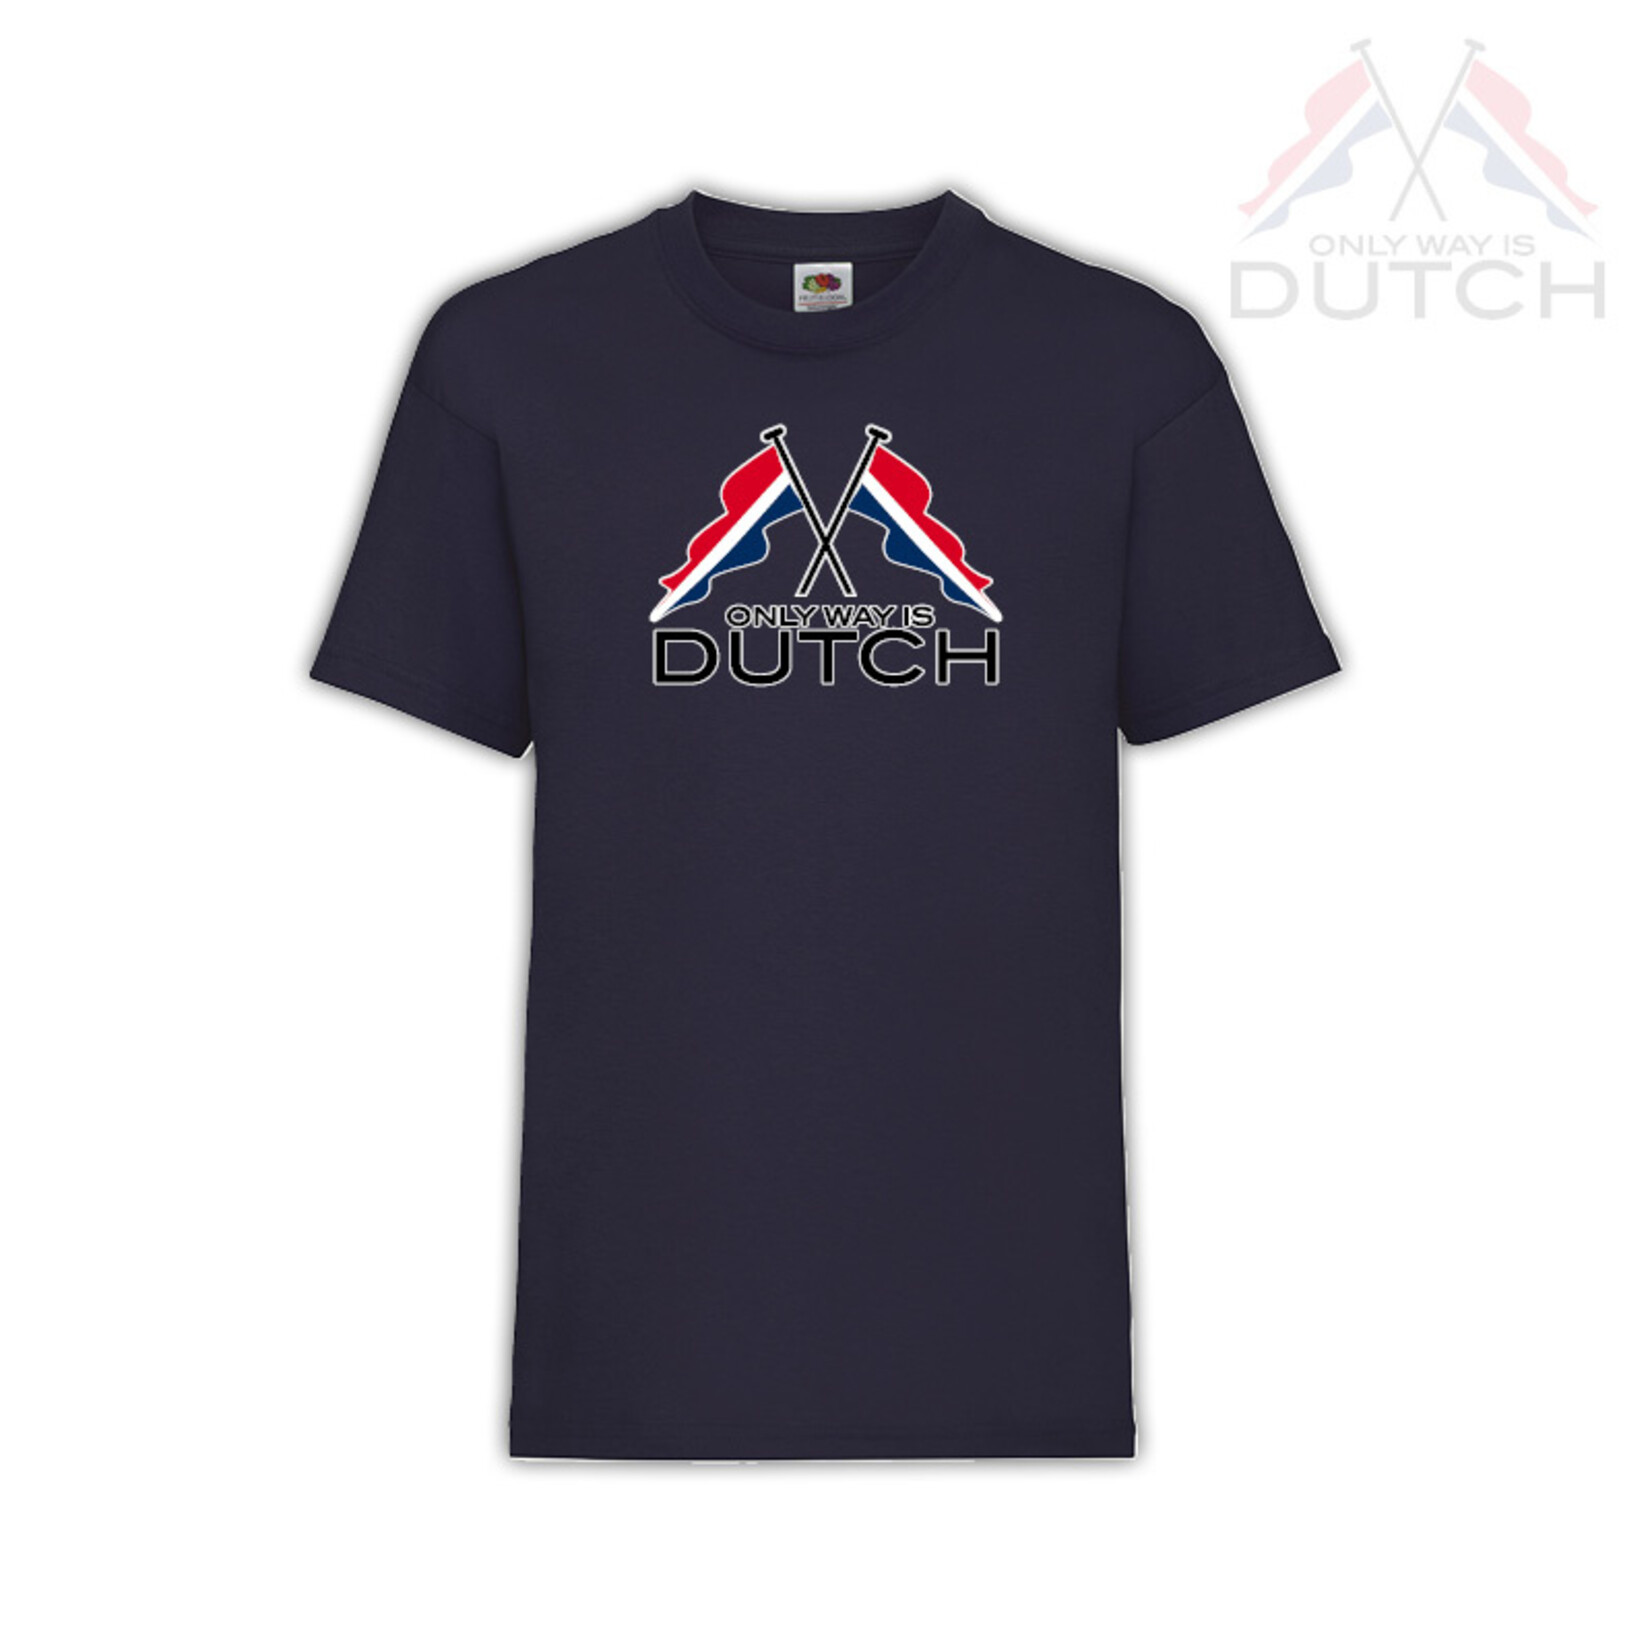 ONLY WAY IS DUTCH T-Shirt  OWID Flag